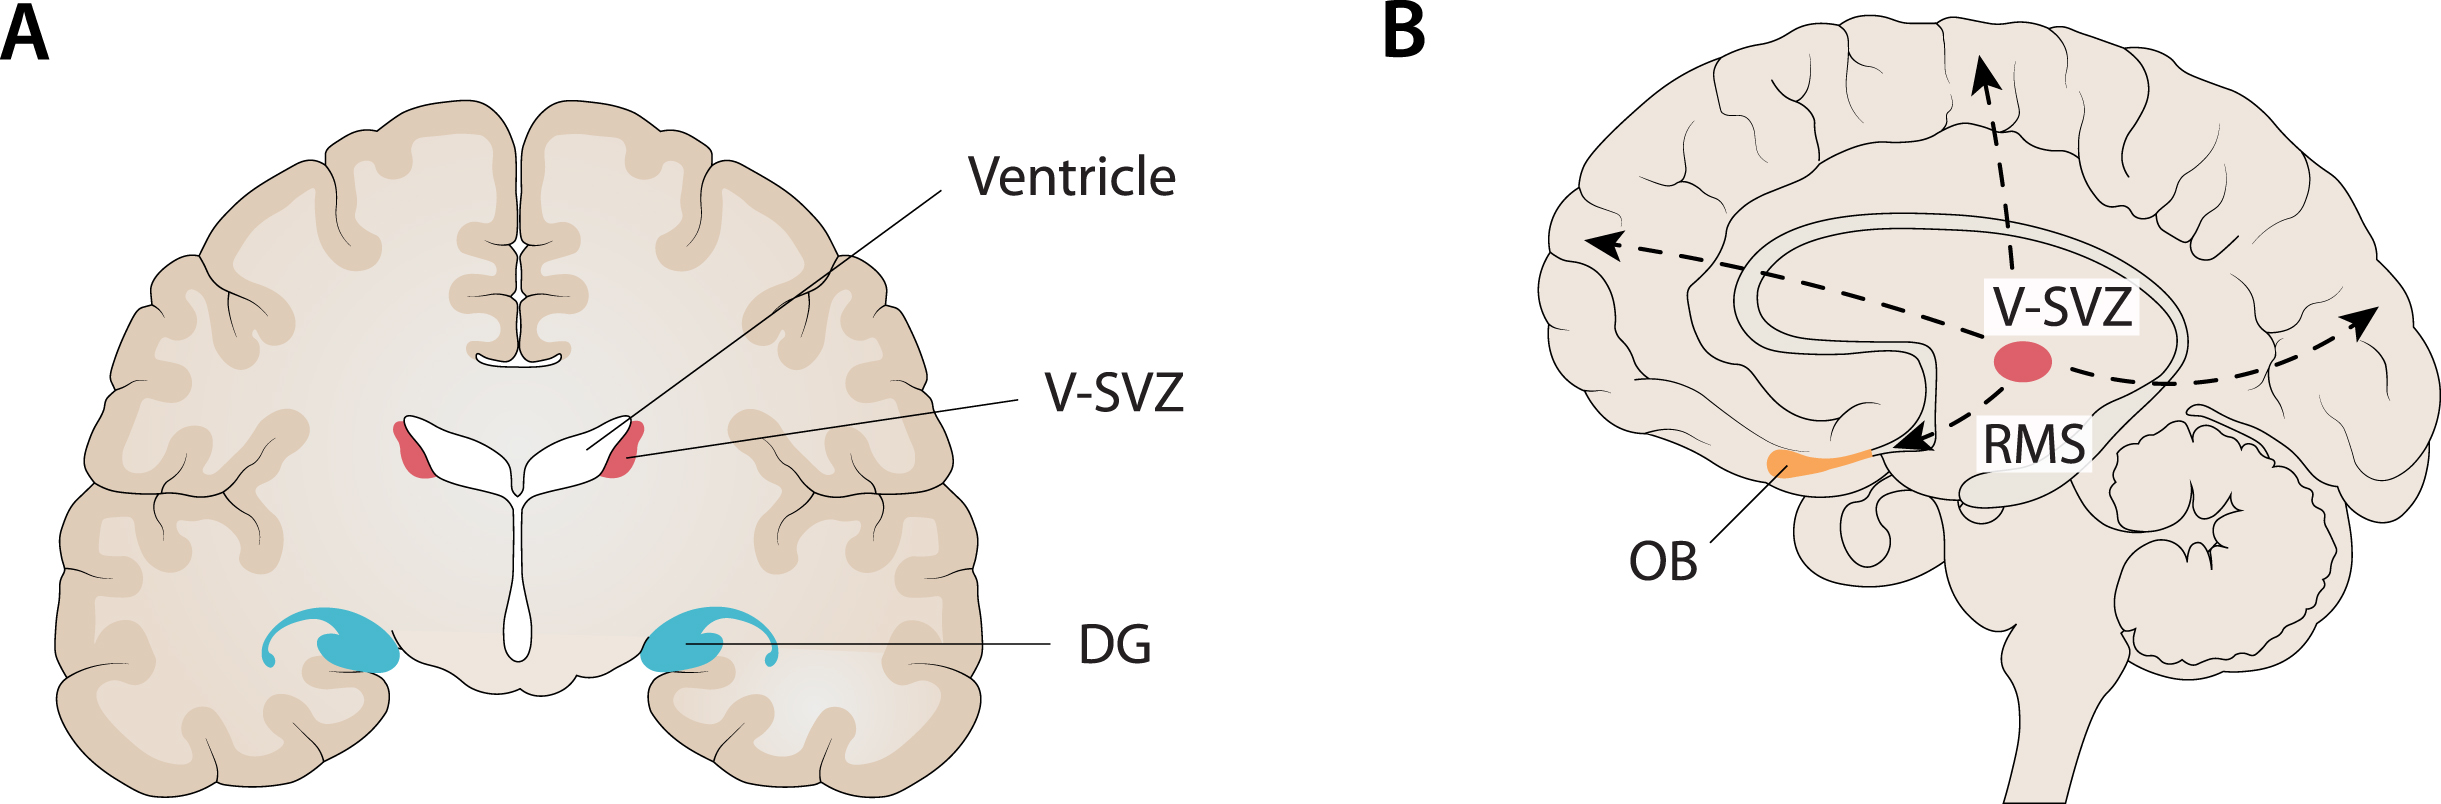 Compatibility between the localization of the main niches of adult neurogenesis and the core regions targeted in AD. A) One of the main niches of adult neurogenesis is the sub-granular zone (SGZ) of the dentate gyrus (DG) in the hippocampus. At the same time, the hippocampus is the first major region targeted in AD, especially when late-onset AD (LOAD) is considered. B) Another main niche in adult neurogenesis is the ventricular subventricular zone (V-SVZ) along the lateral ventricles. From this niche, through several long migrations to the cortex (dashed lines), it is possible to reach every cortical region (e.g., frontal, fronto-parietal, occipital) that is targeted by AD, especially when considering early-onset AD (EOAD) and syndromic variants of AD. In addition, it is noteworthy that the olfactory bulb (OB) is the end point of neuroblasts migrating from the V-SVZ along the rostral migratory stream (RMS) and, at the same time, many findings support an early involvement of this region in AD. Figure 2 was produced by Antonio Garcia, scientific illustrator from Bio-Graphics.